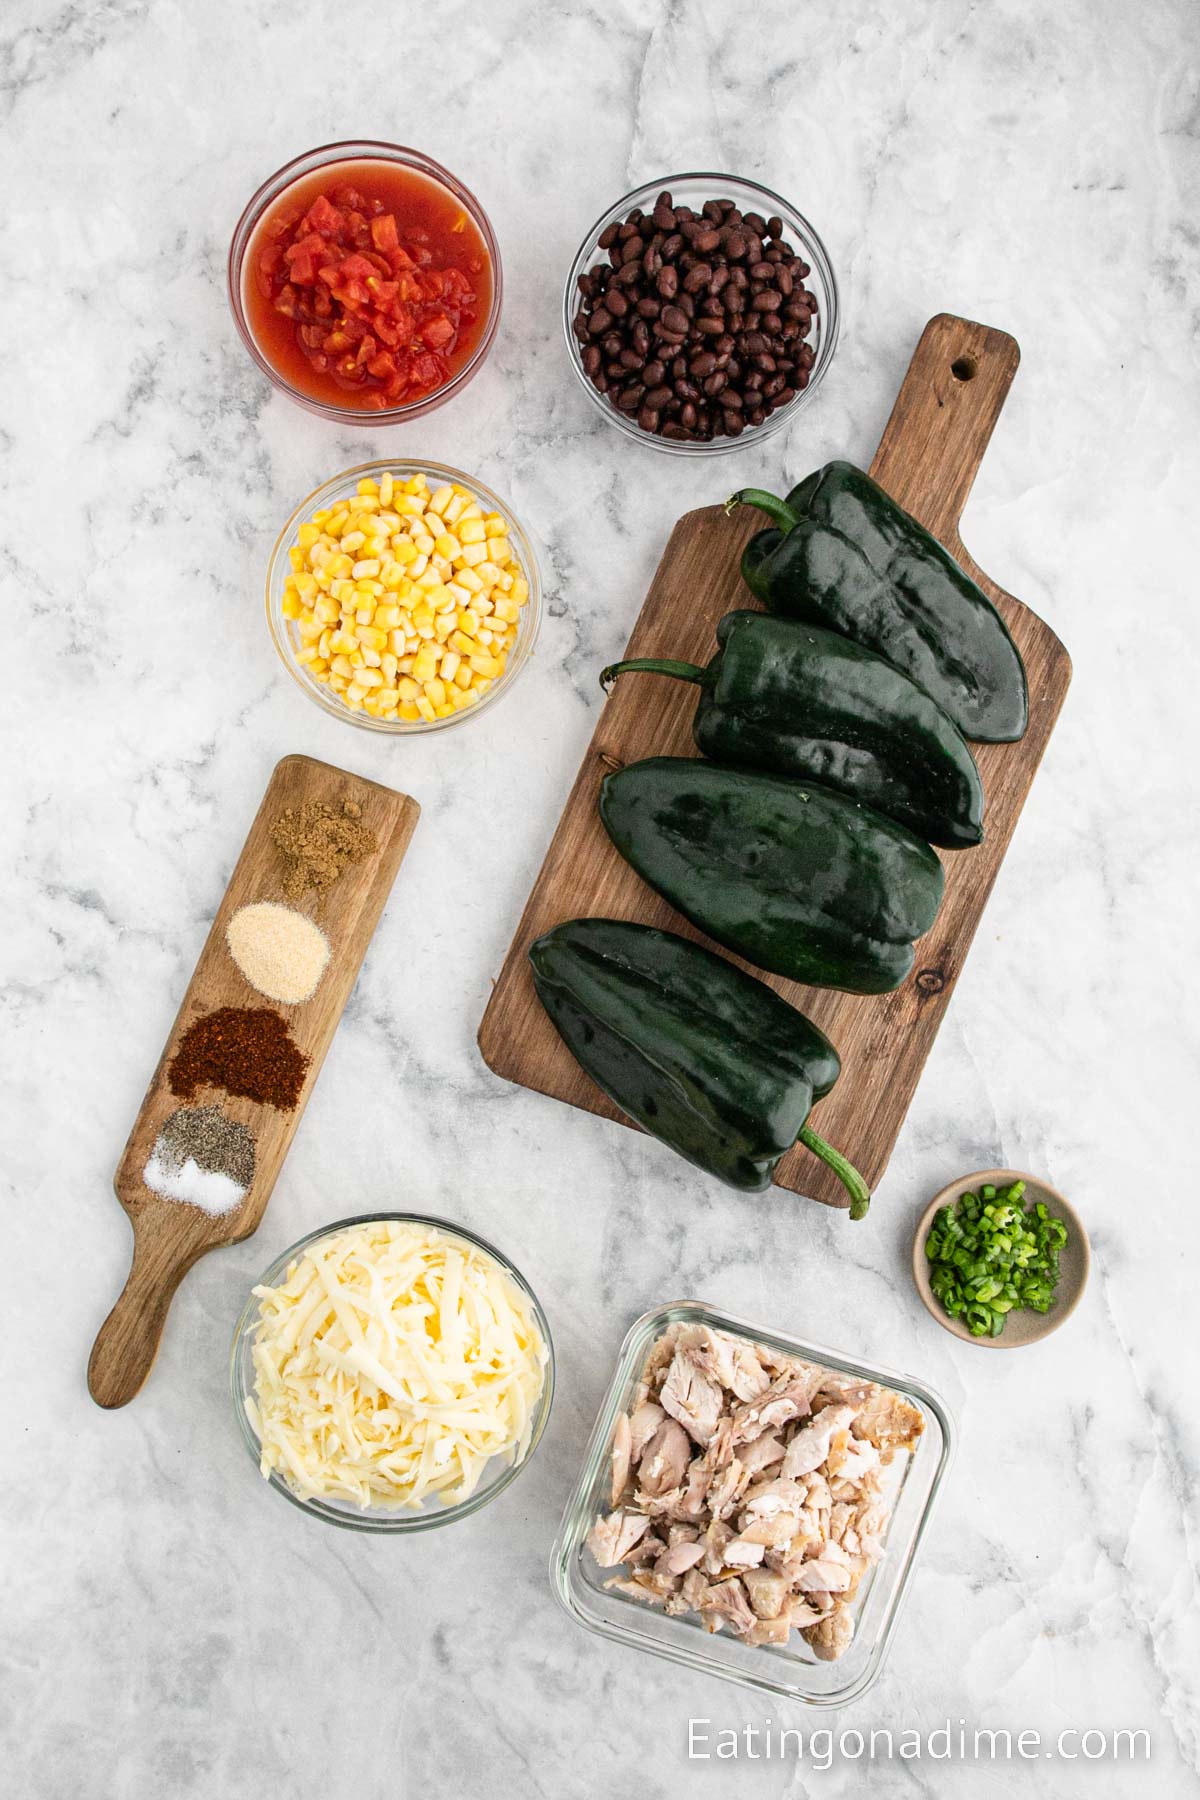 Chicken Stuffed Poblano Peppers ingredients - poblano peppers, chicken, cheese, green onions, black beans, diced tomatoes, corn, garlic powder, chili powder, cumin, salt, pepper